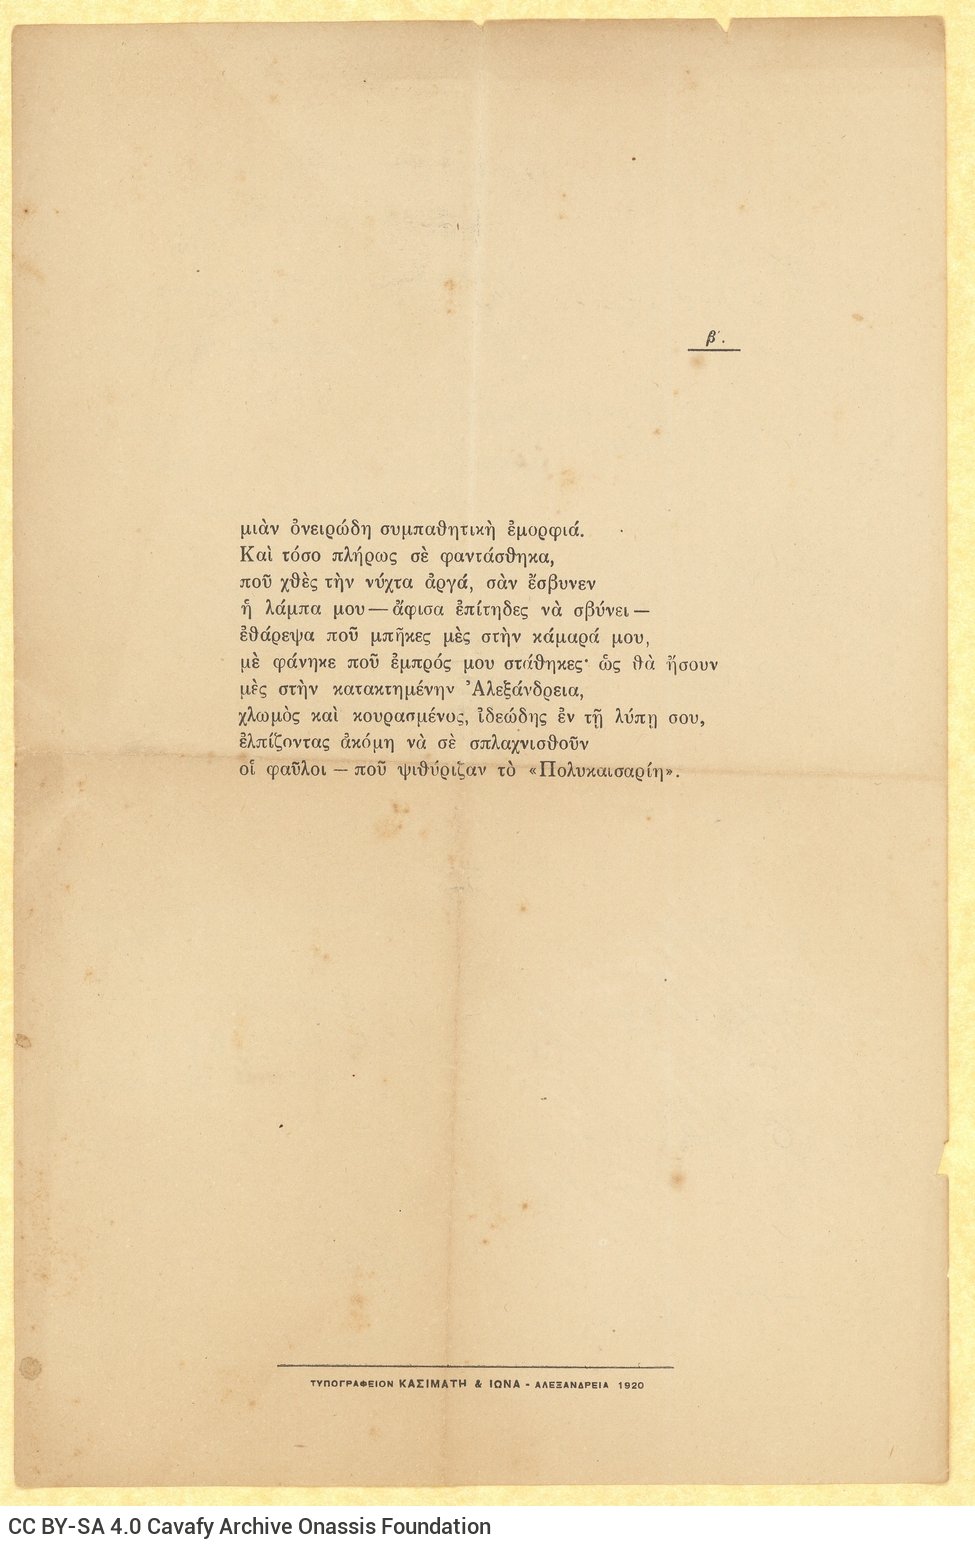 Handwritten titles of poems by Cavafy, accompanied by bibliographical references, on the verso of a printed broadsheet wit